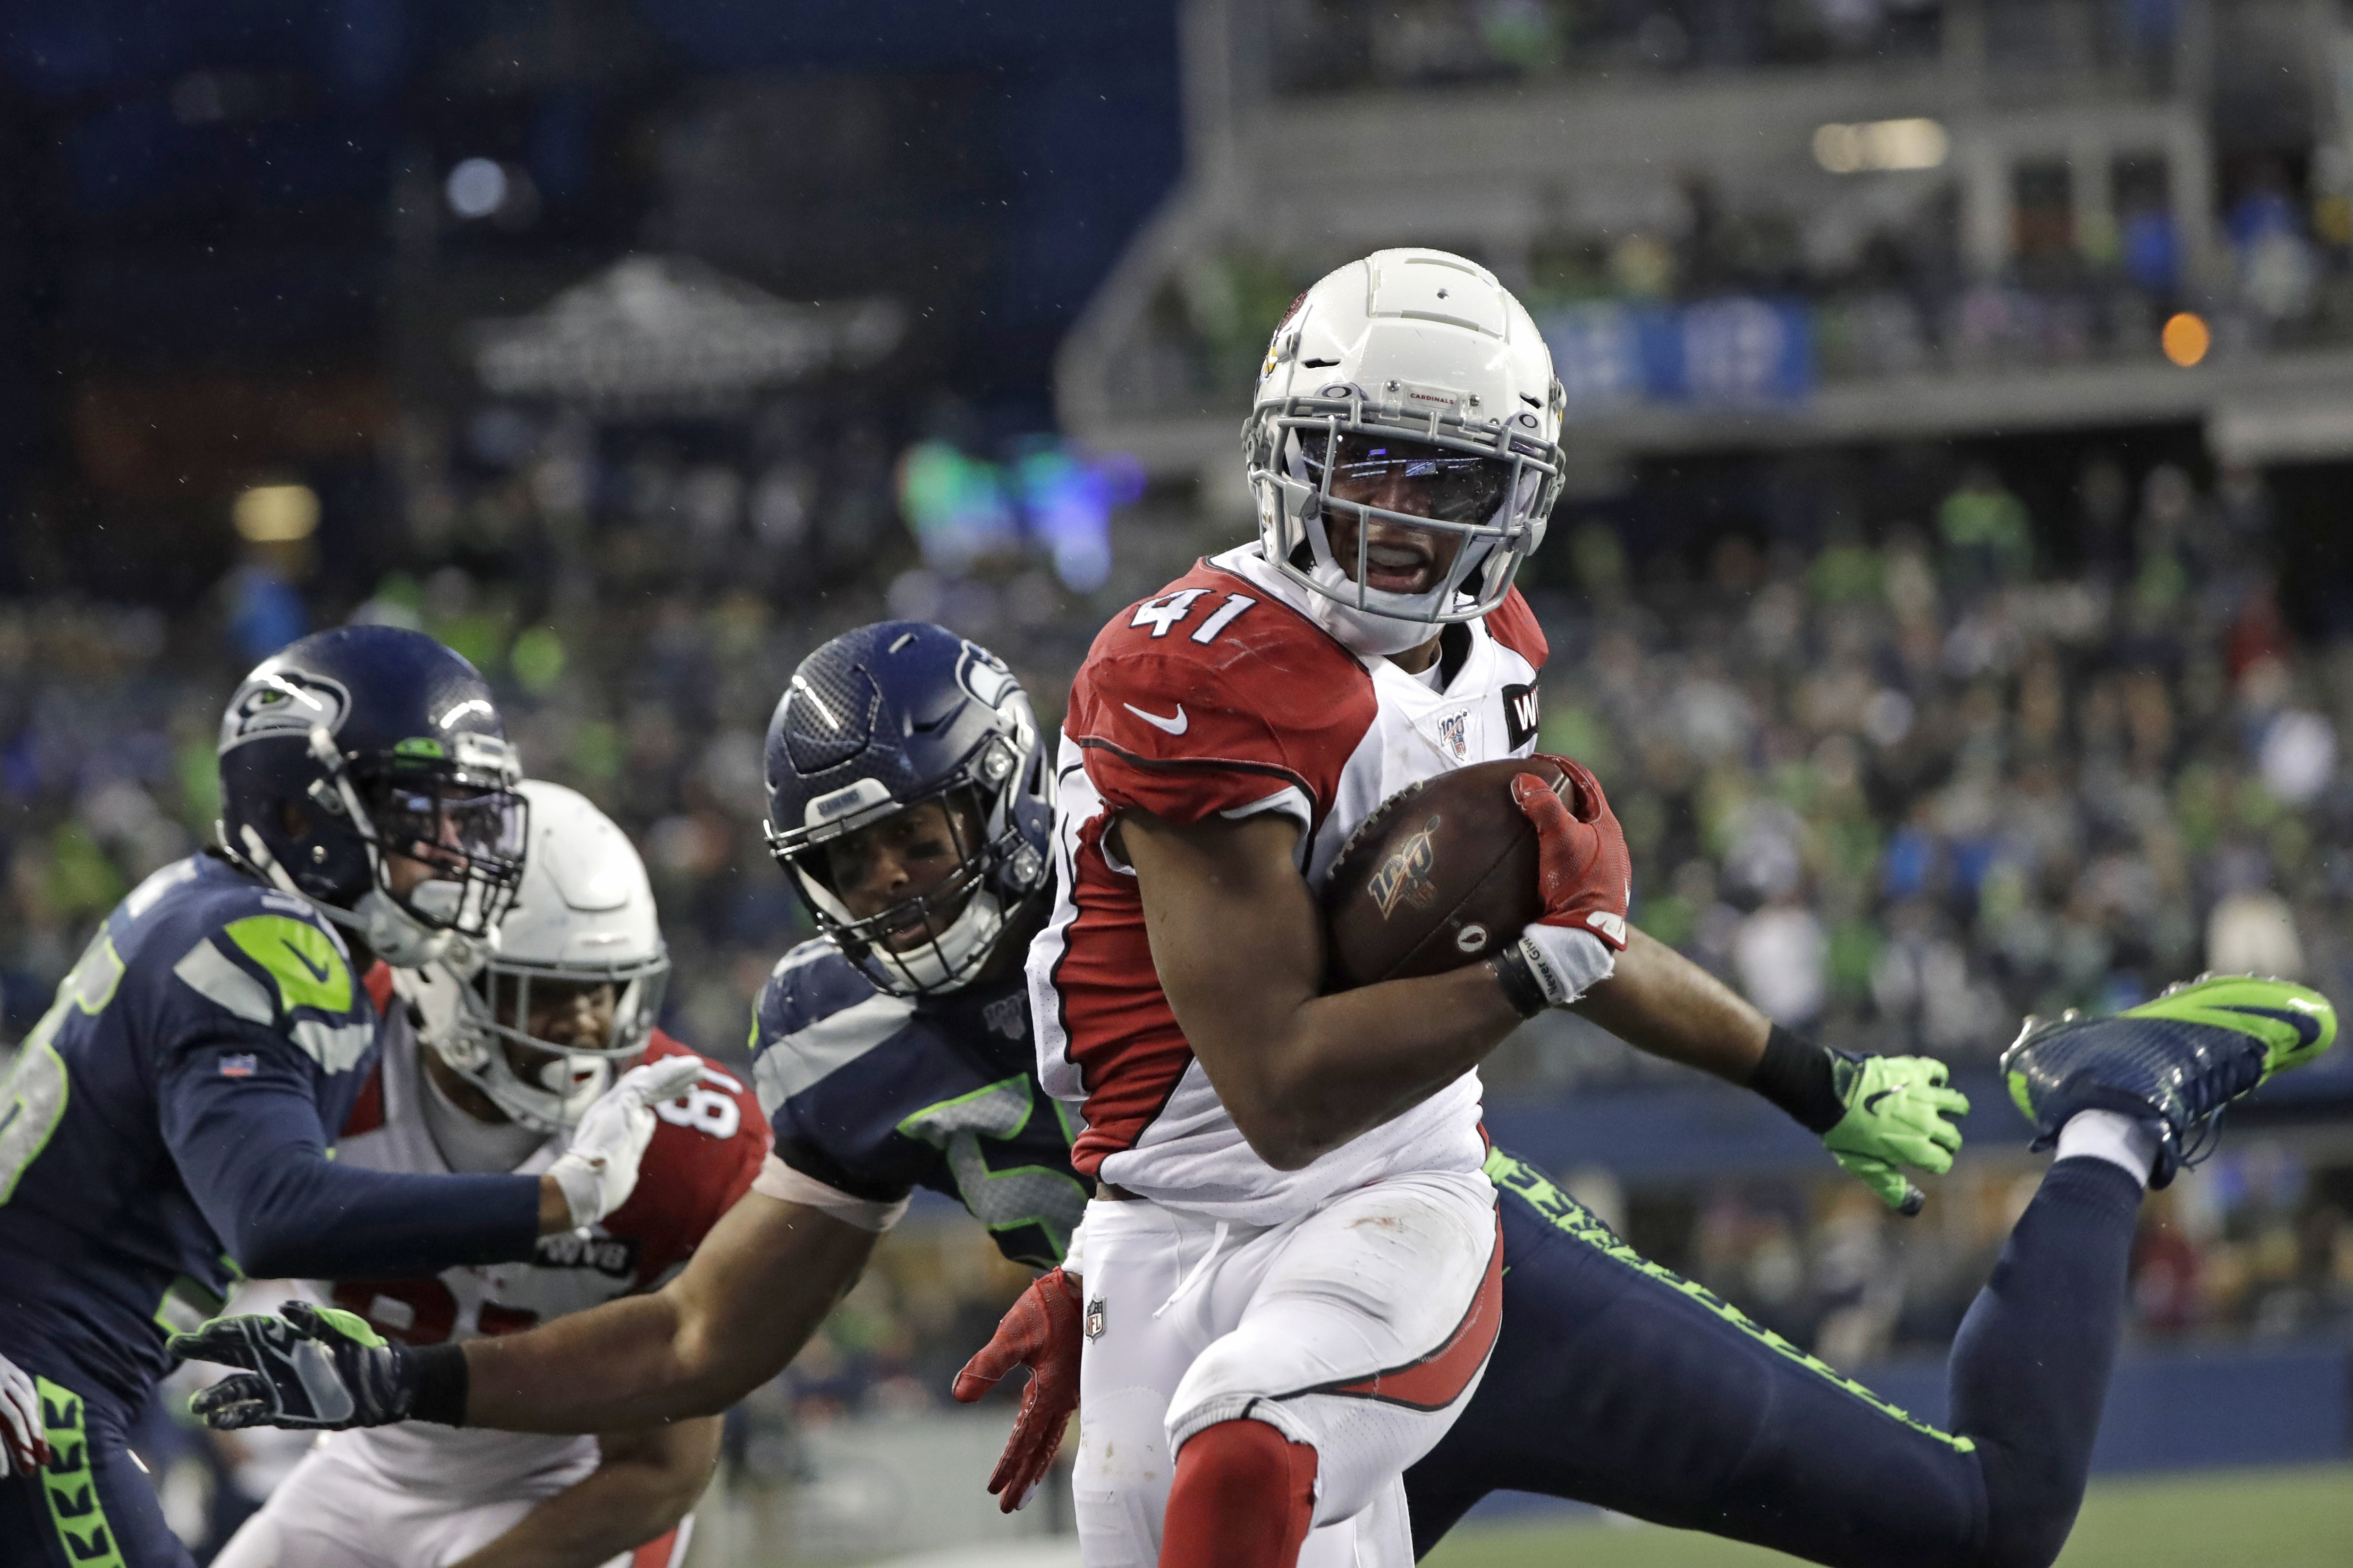 Cardinals roll past playoff-bound Seahawks in 27-13 victory